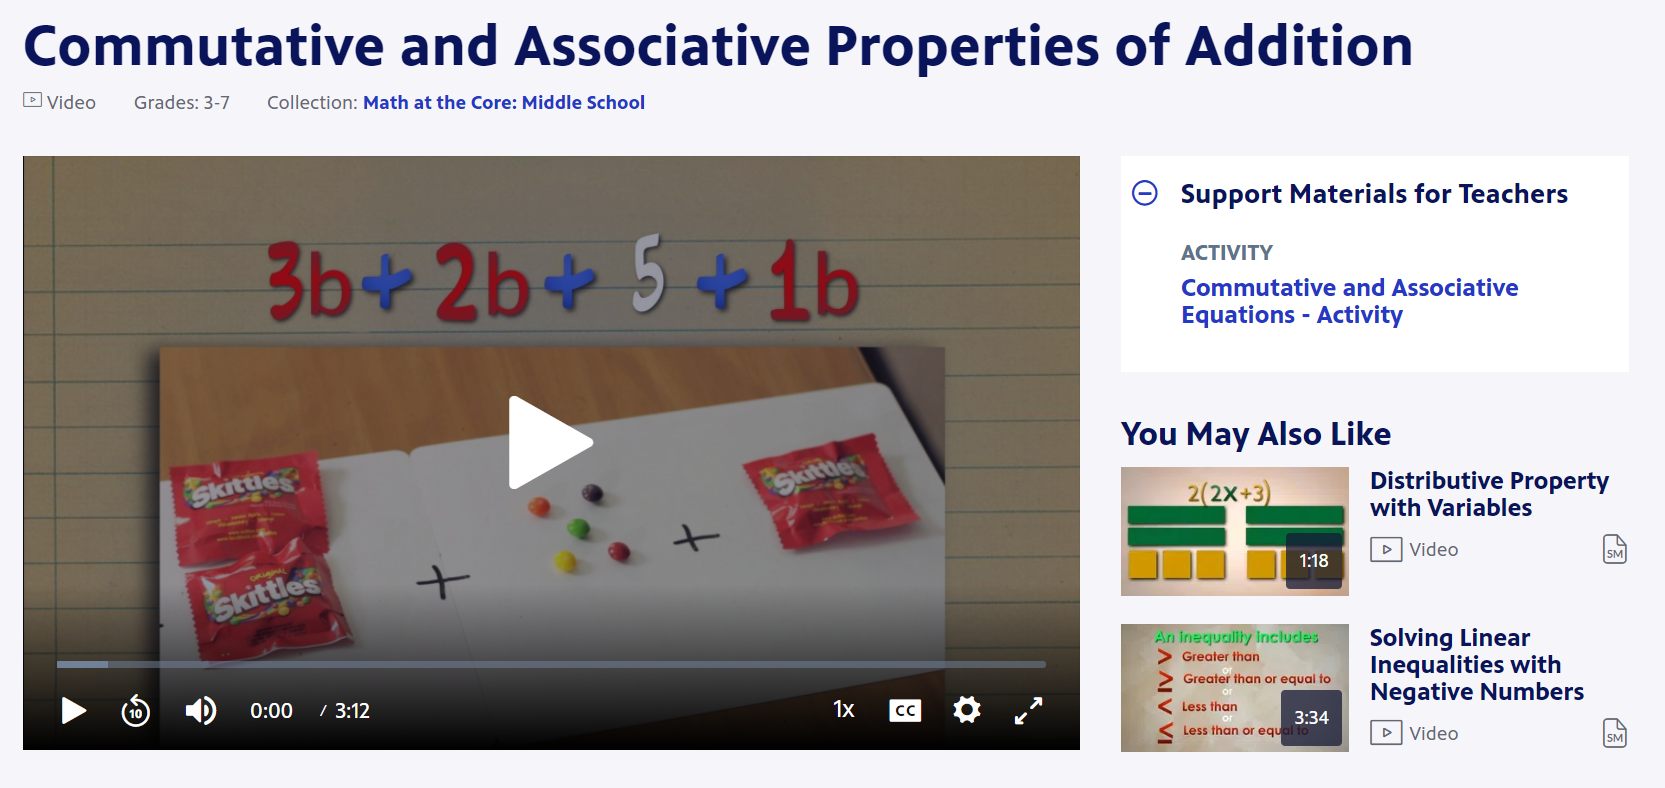 commutative and associative activity demonstration image and video